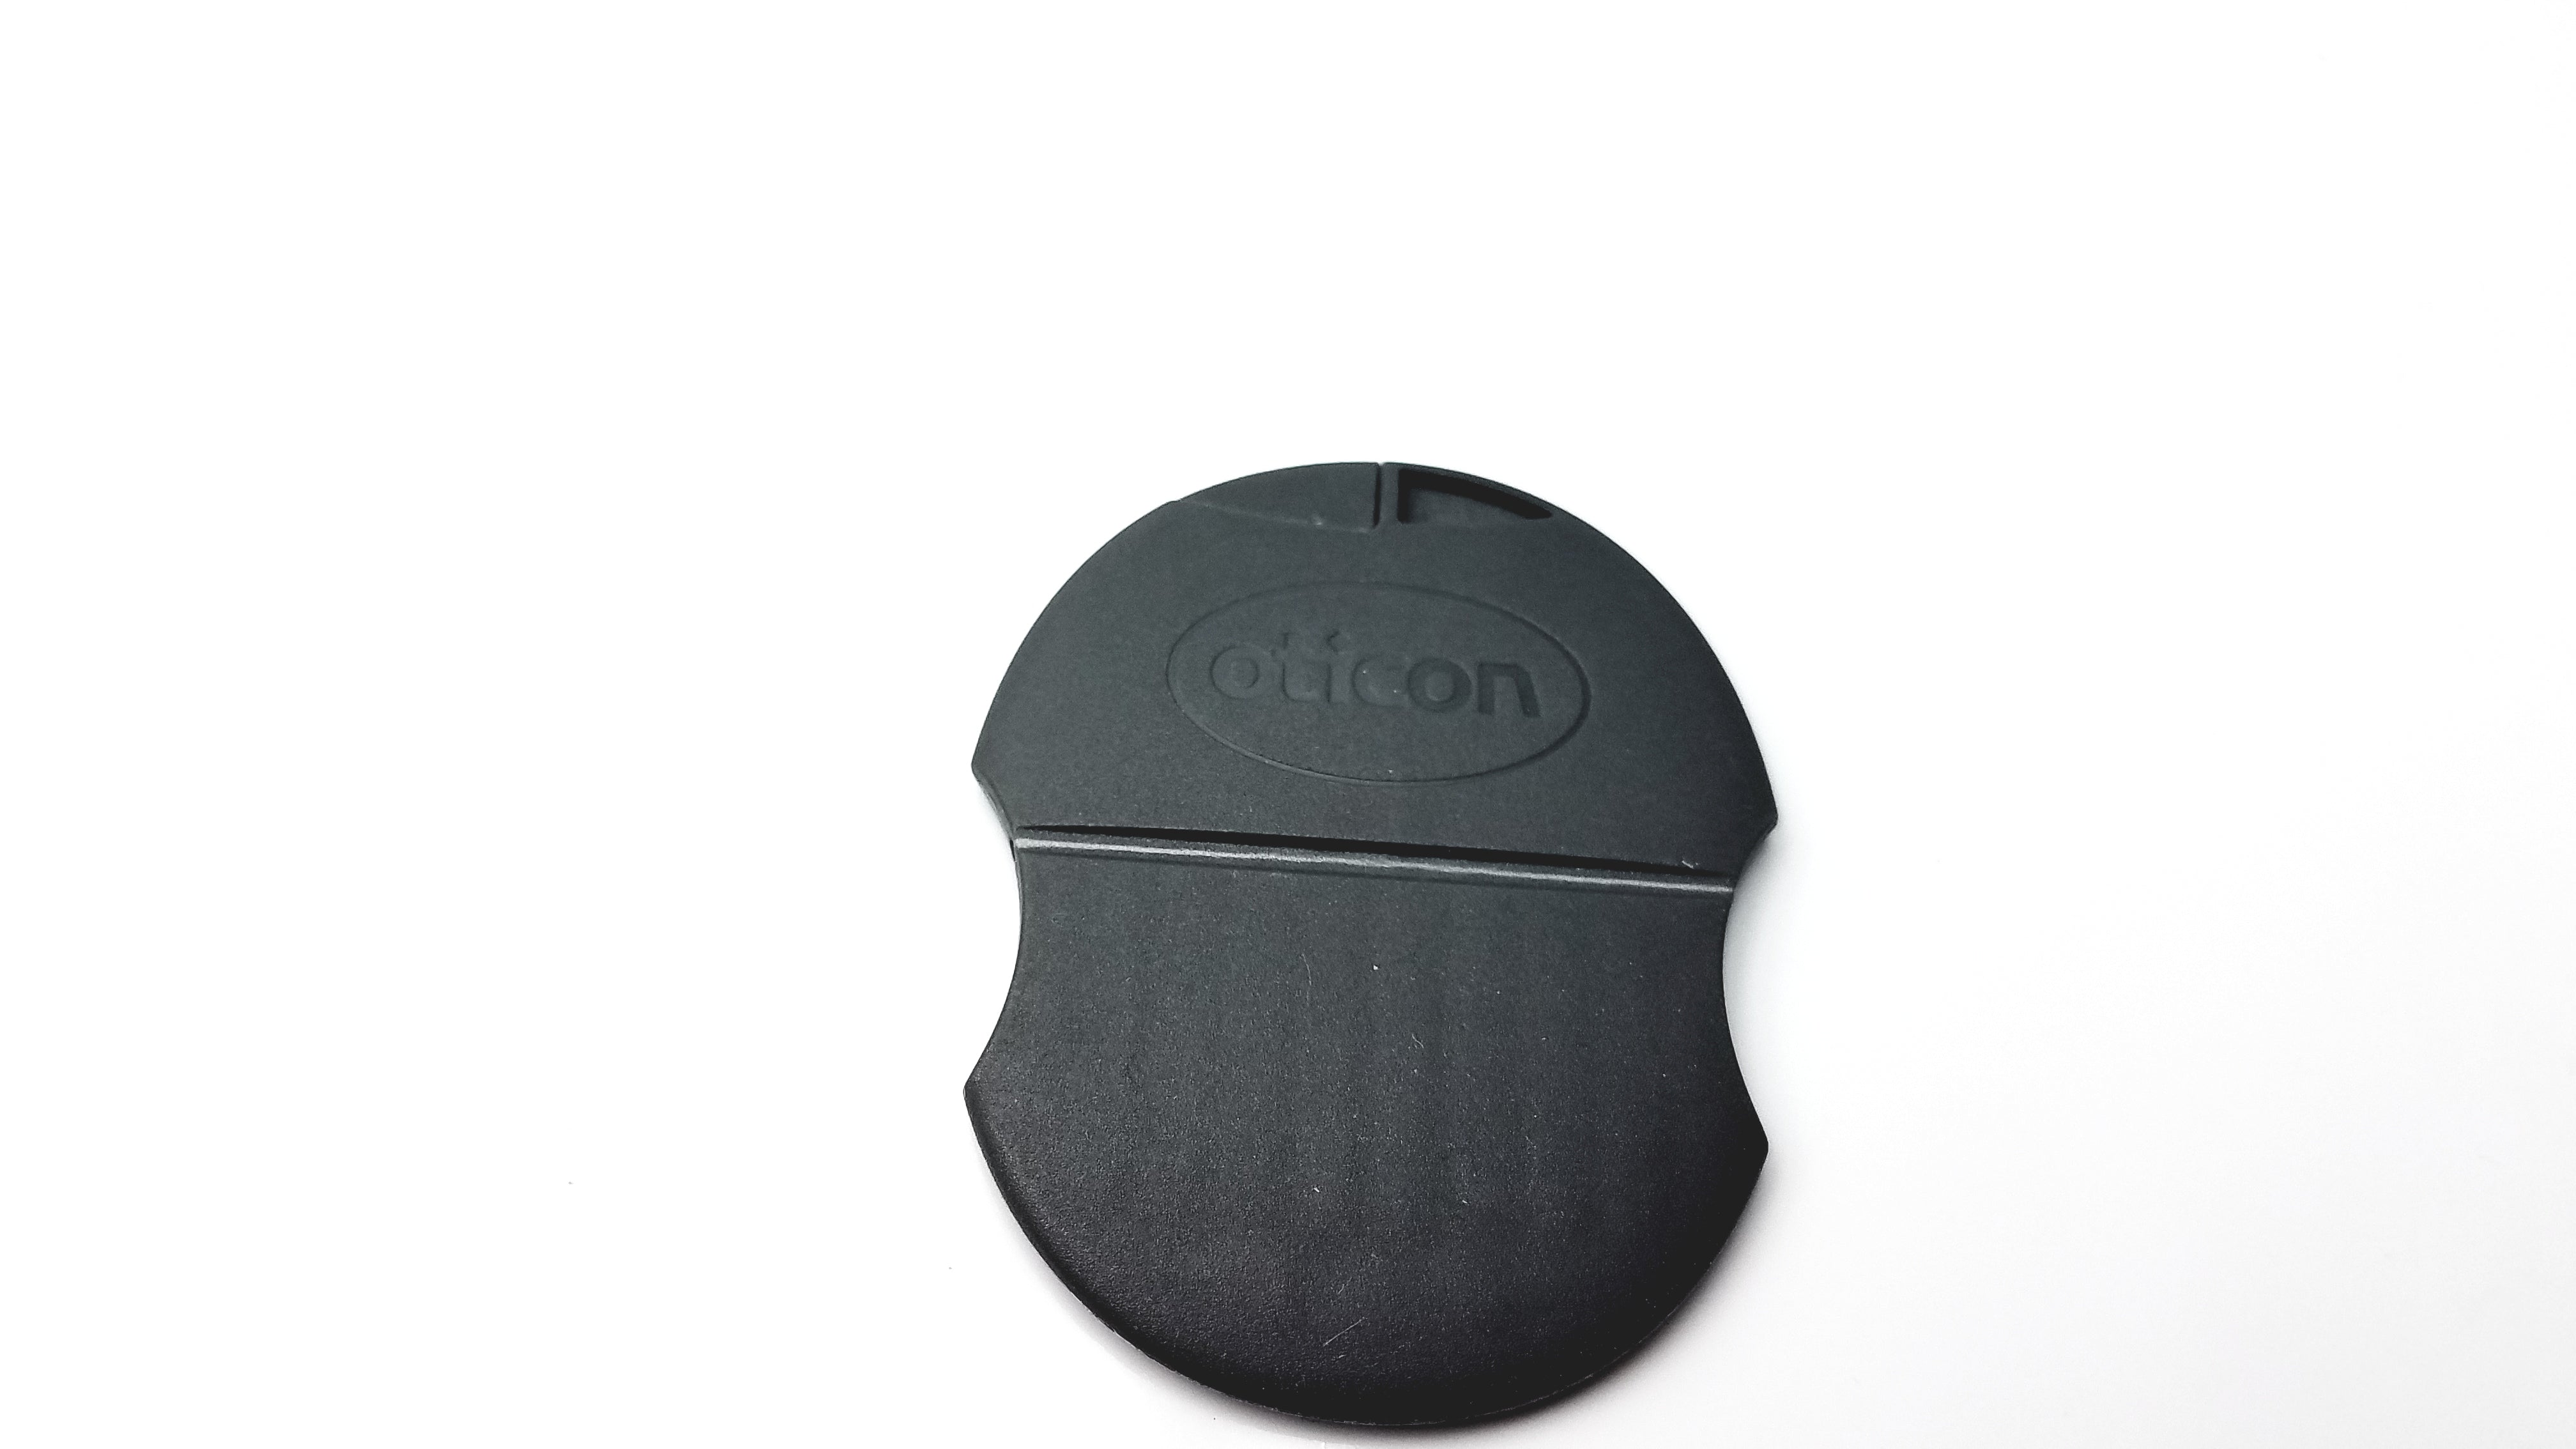 Load image into Gallery viewer, Oticon T-Cap Microphone Cover For Heading Aids Dark Brown